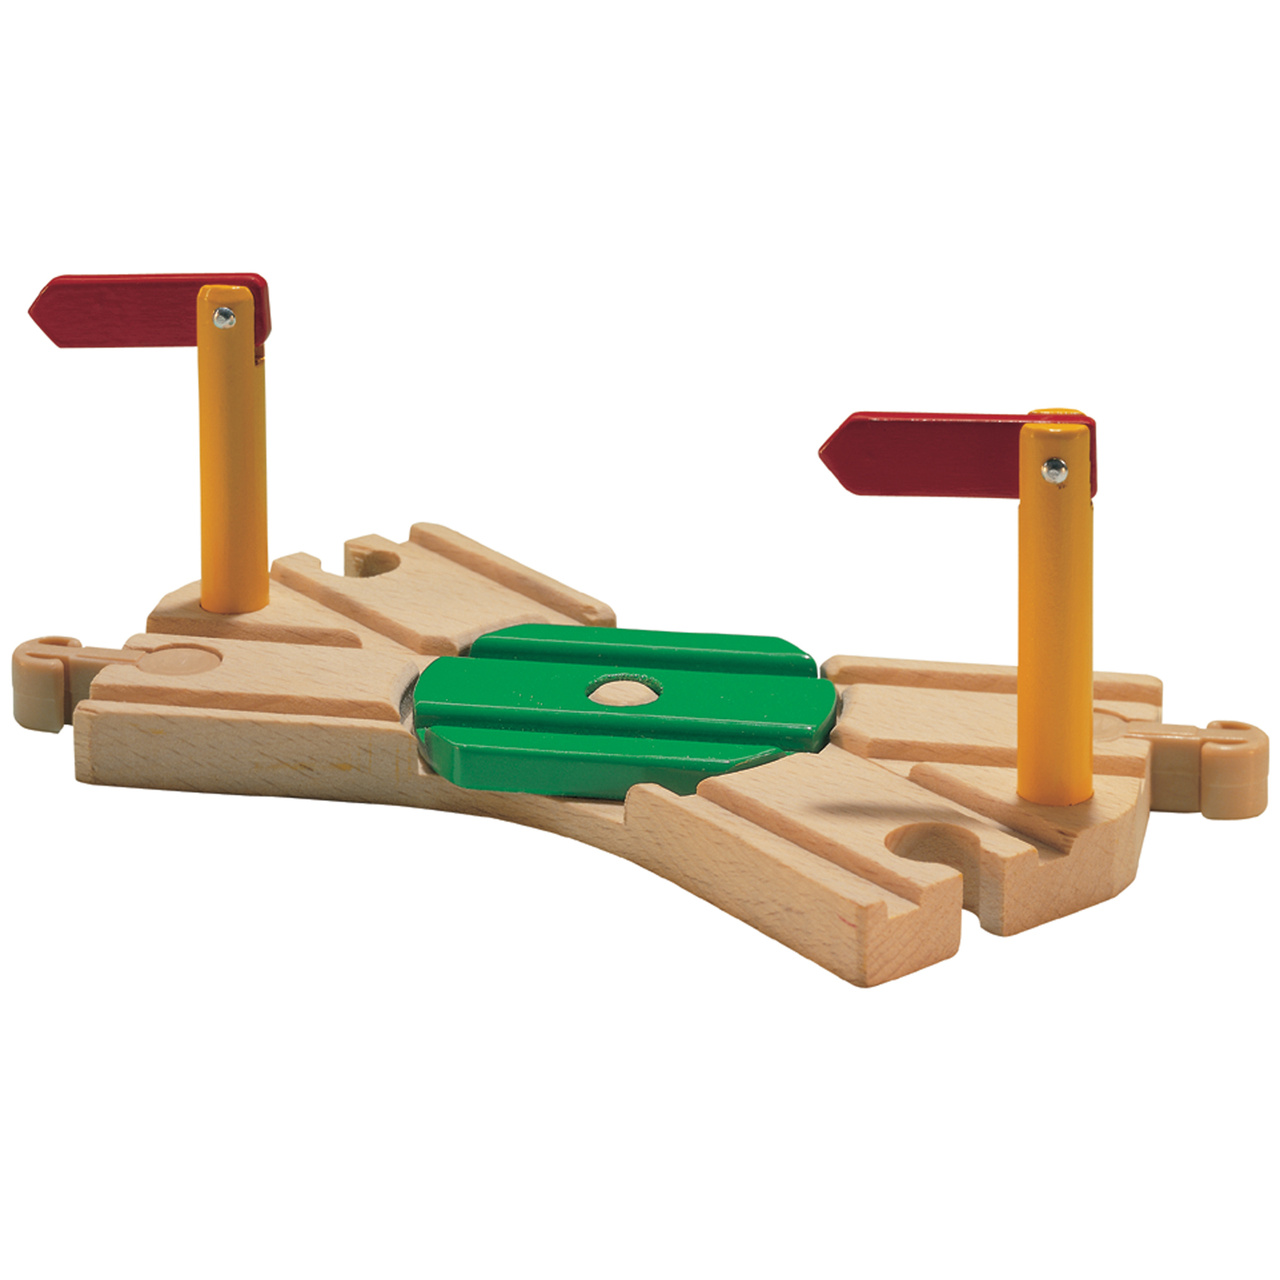 MICKI TRAIN SET TRAIN TRACK MOVING SWITCH WOODEN